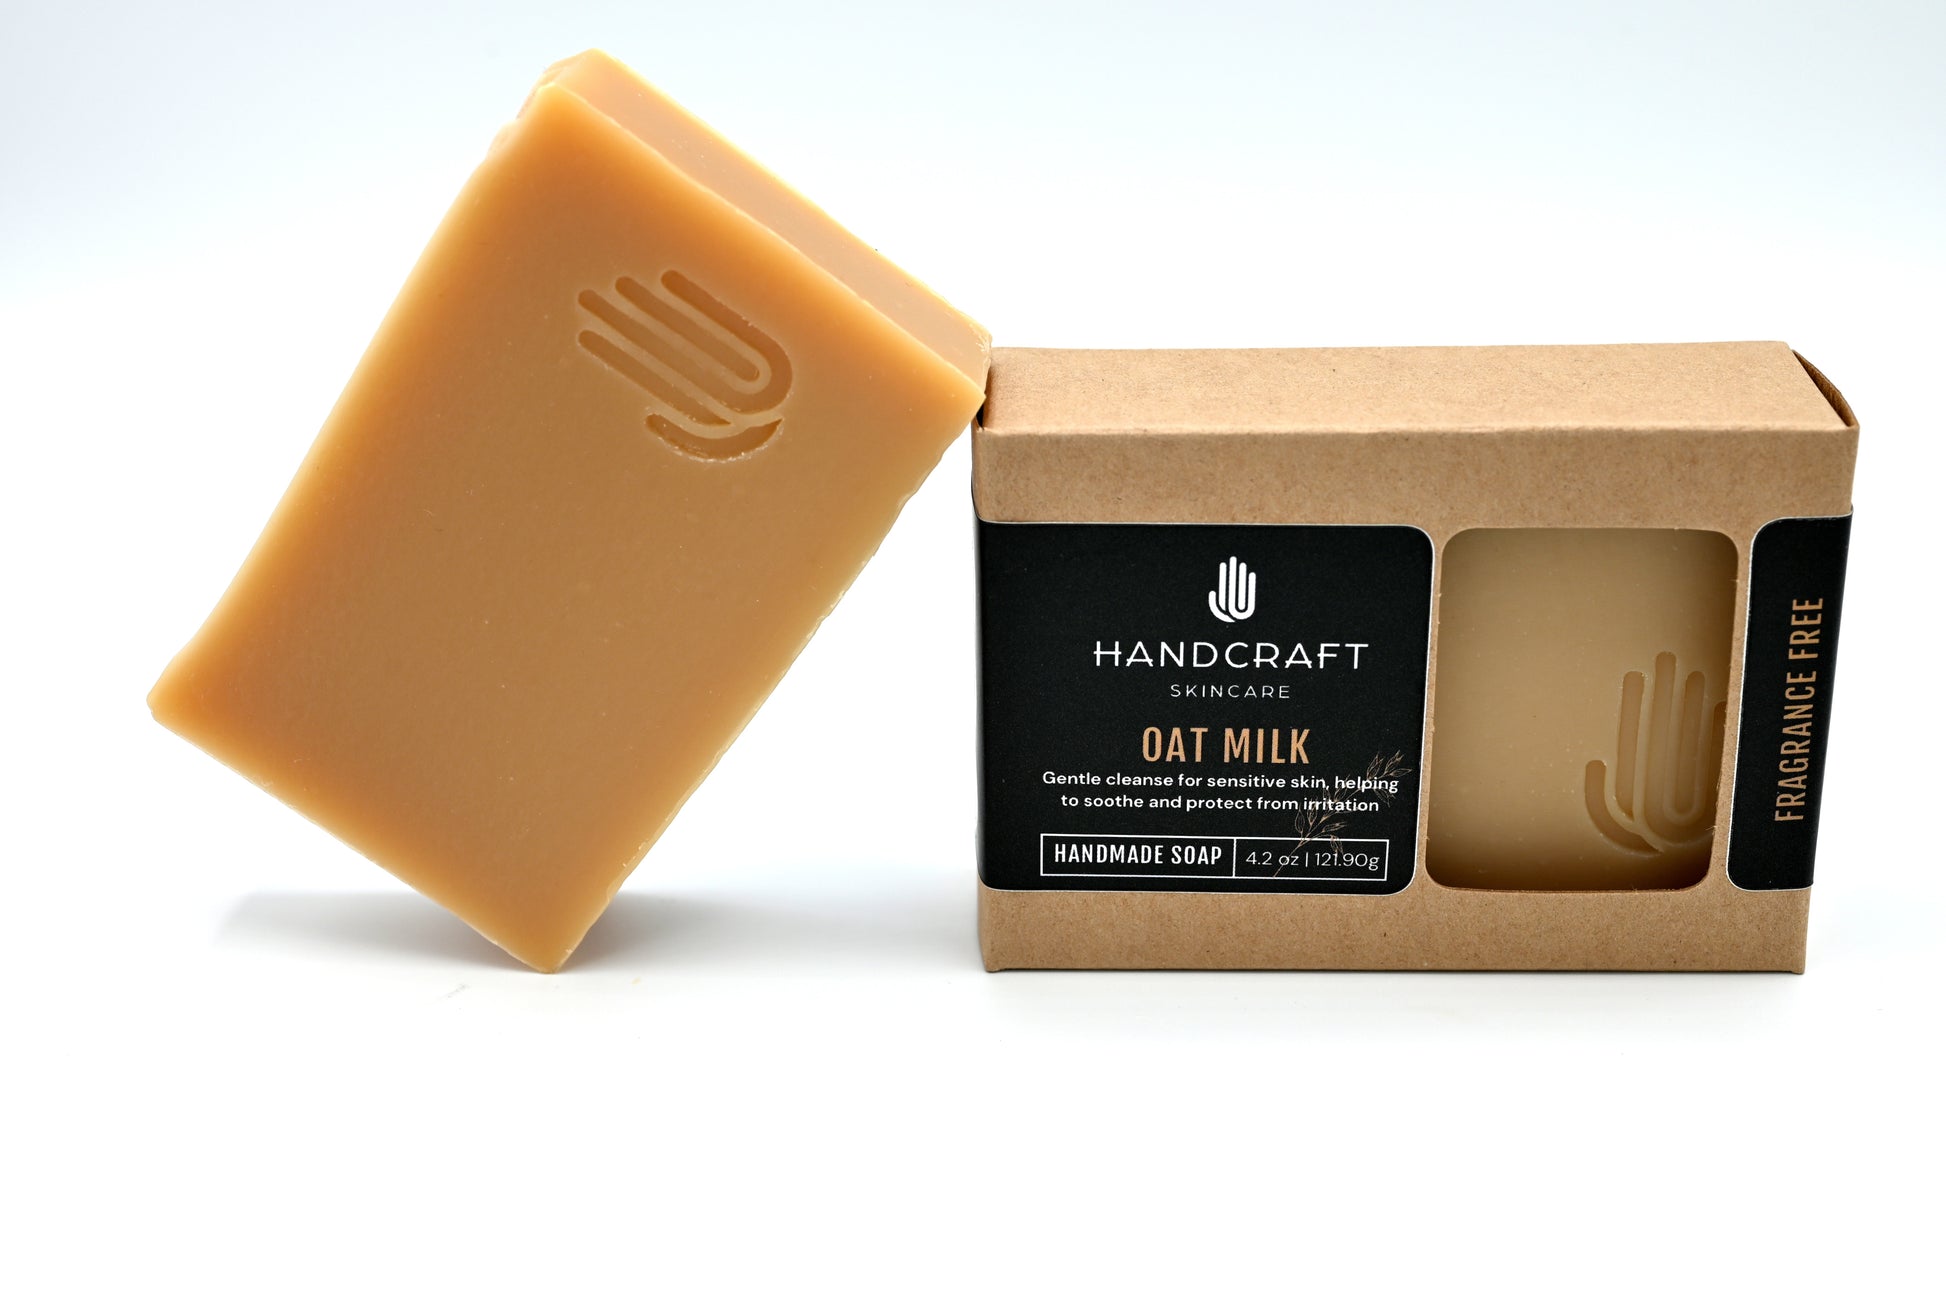 taupe colored oat milk soap is unpackaged and leaning at an angle on a packaged oat milk soap in a Kraft box with a black label